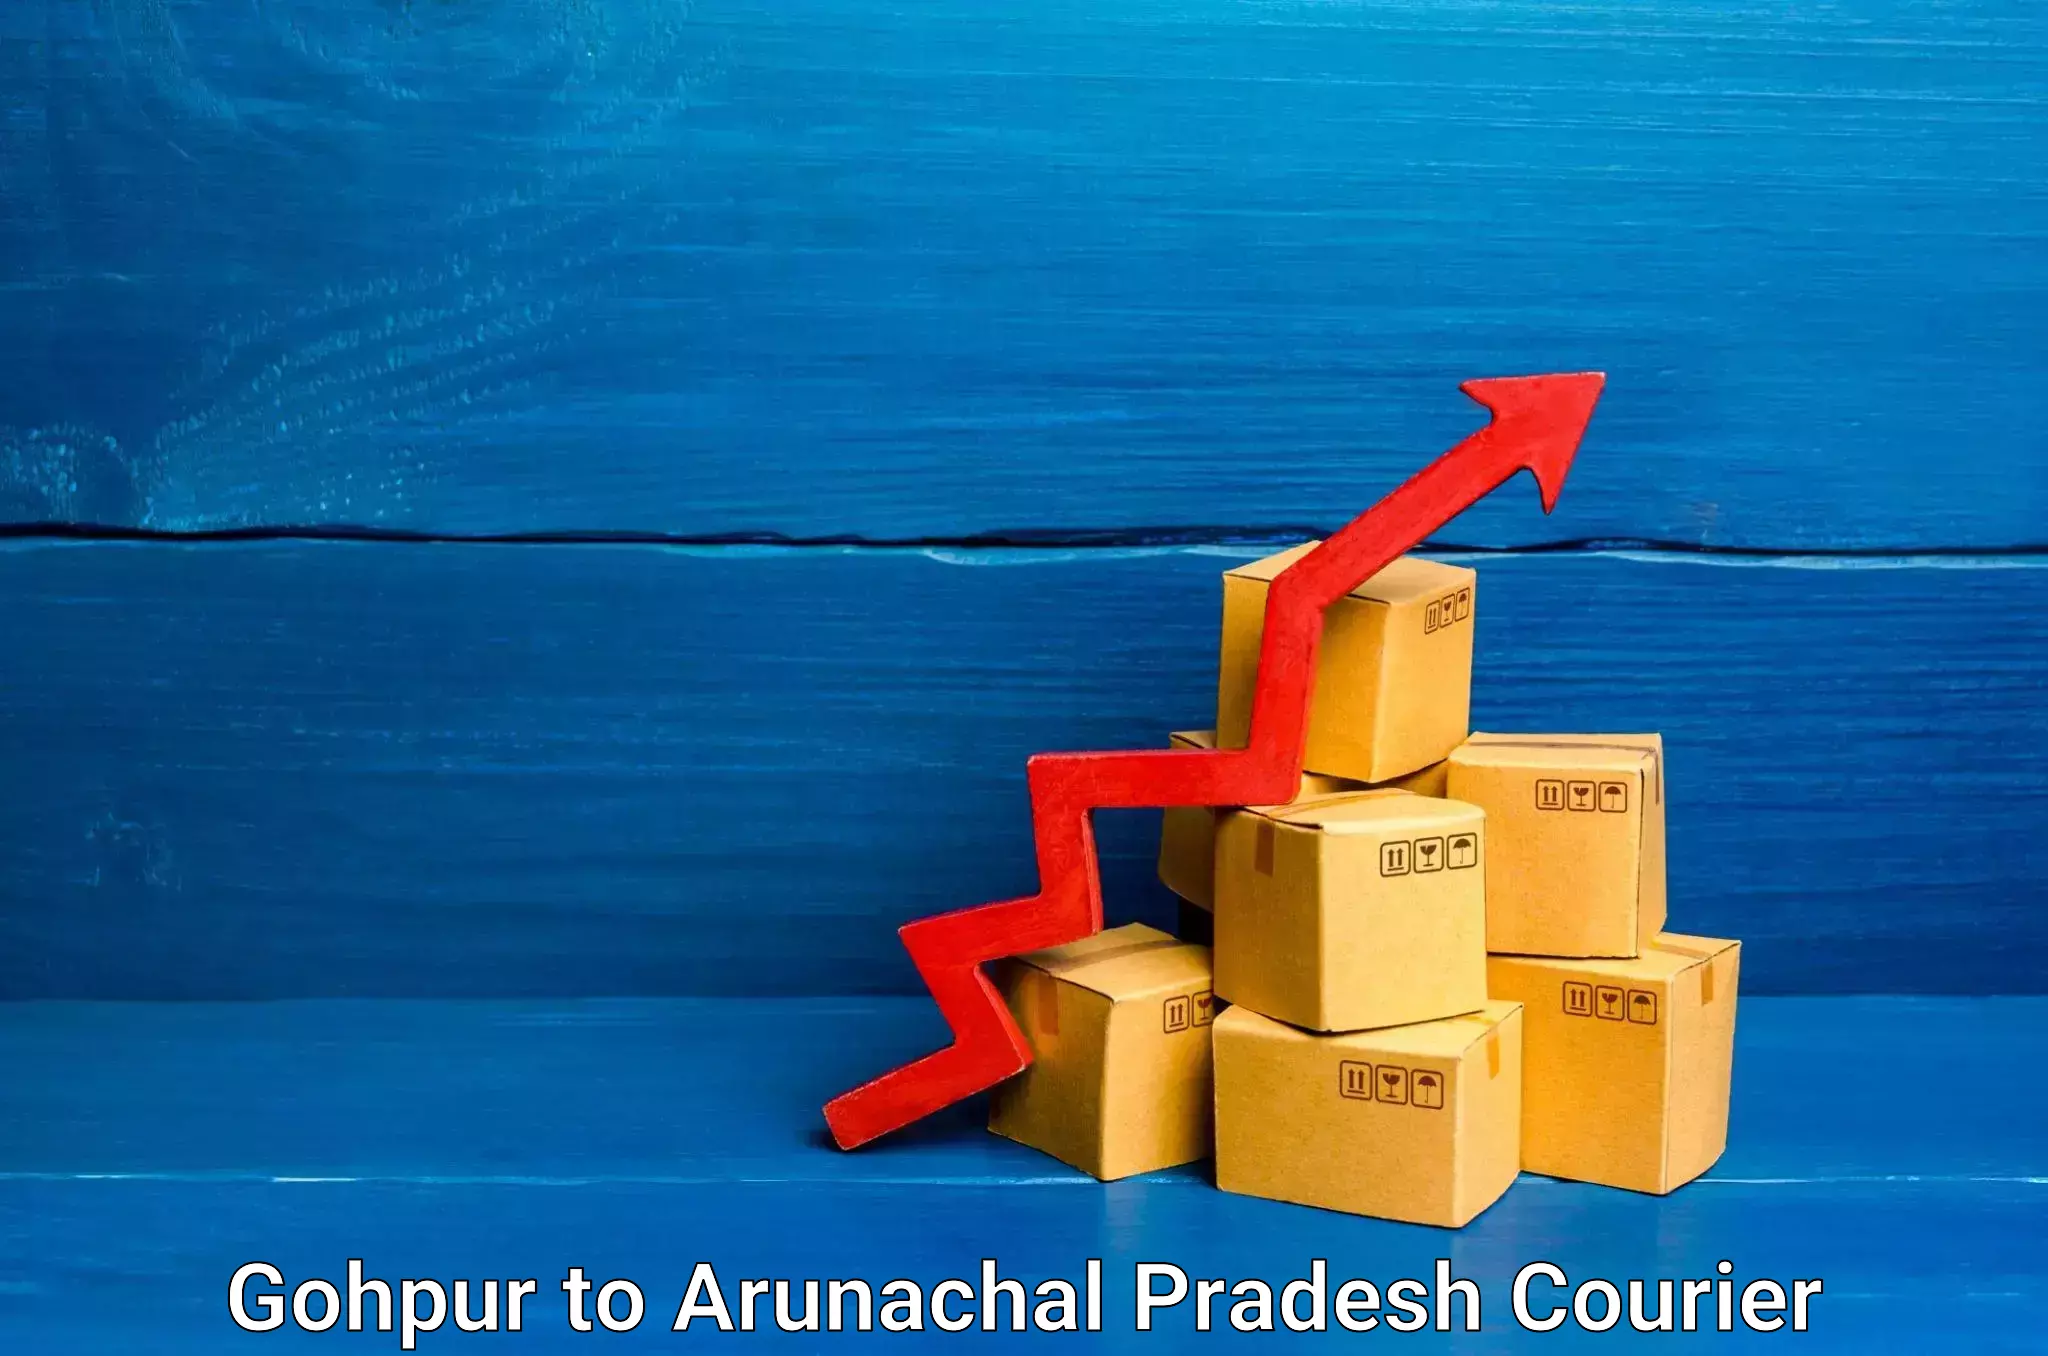 Comprehensive shipping network in Gohpur to Deomali